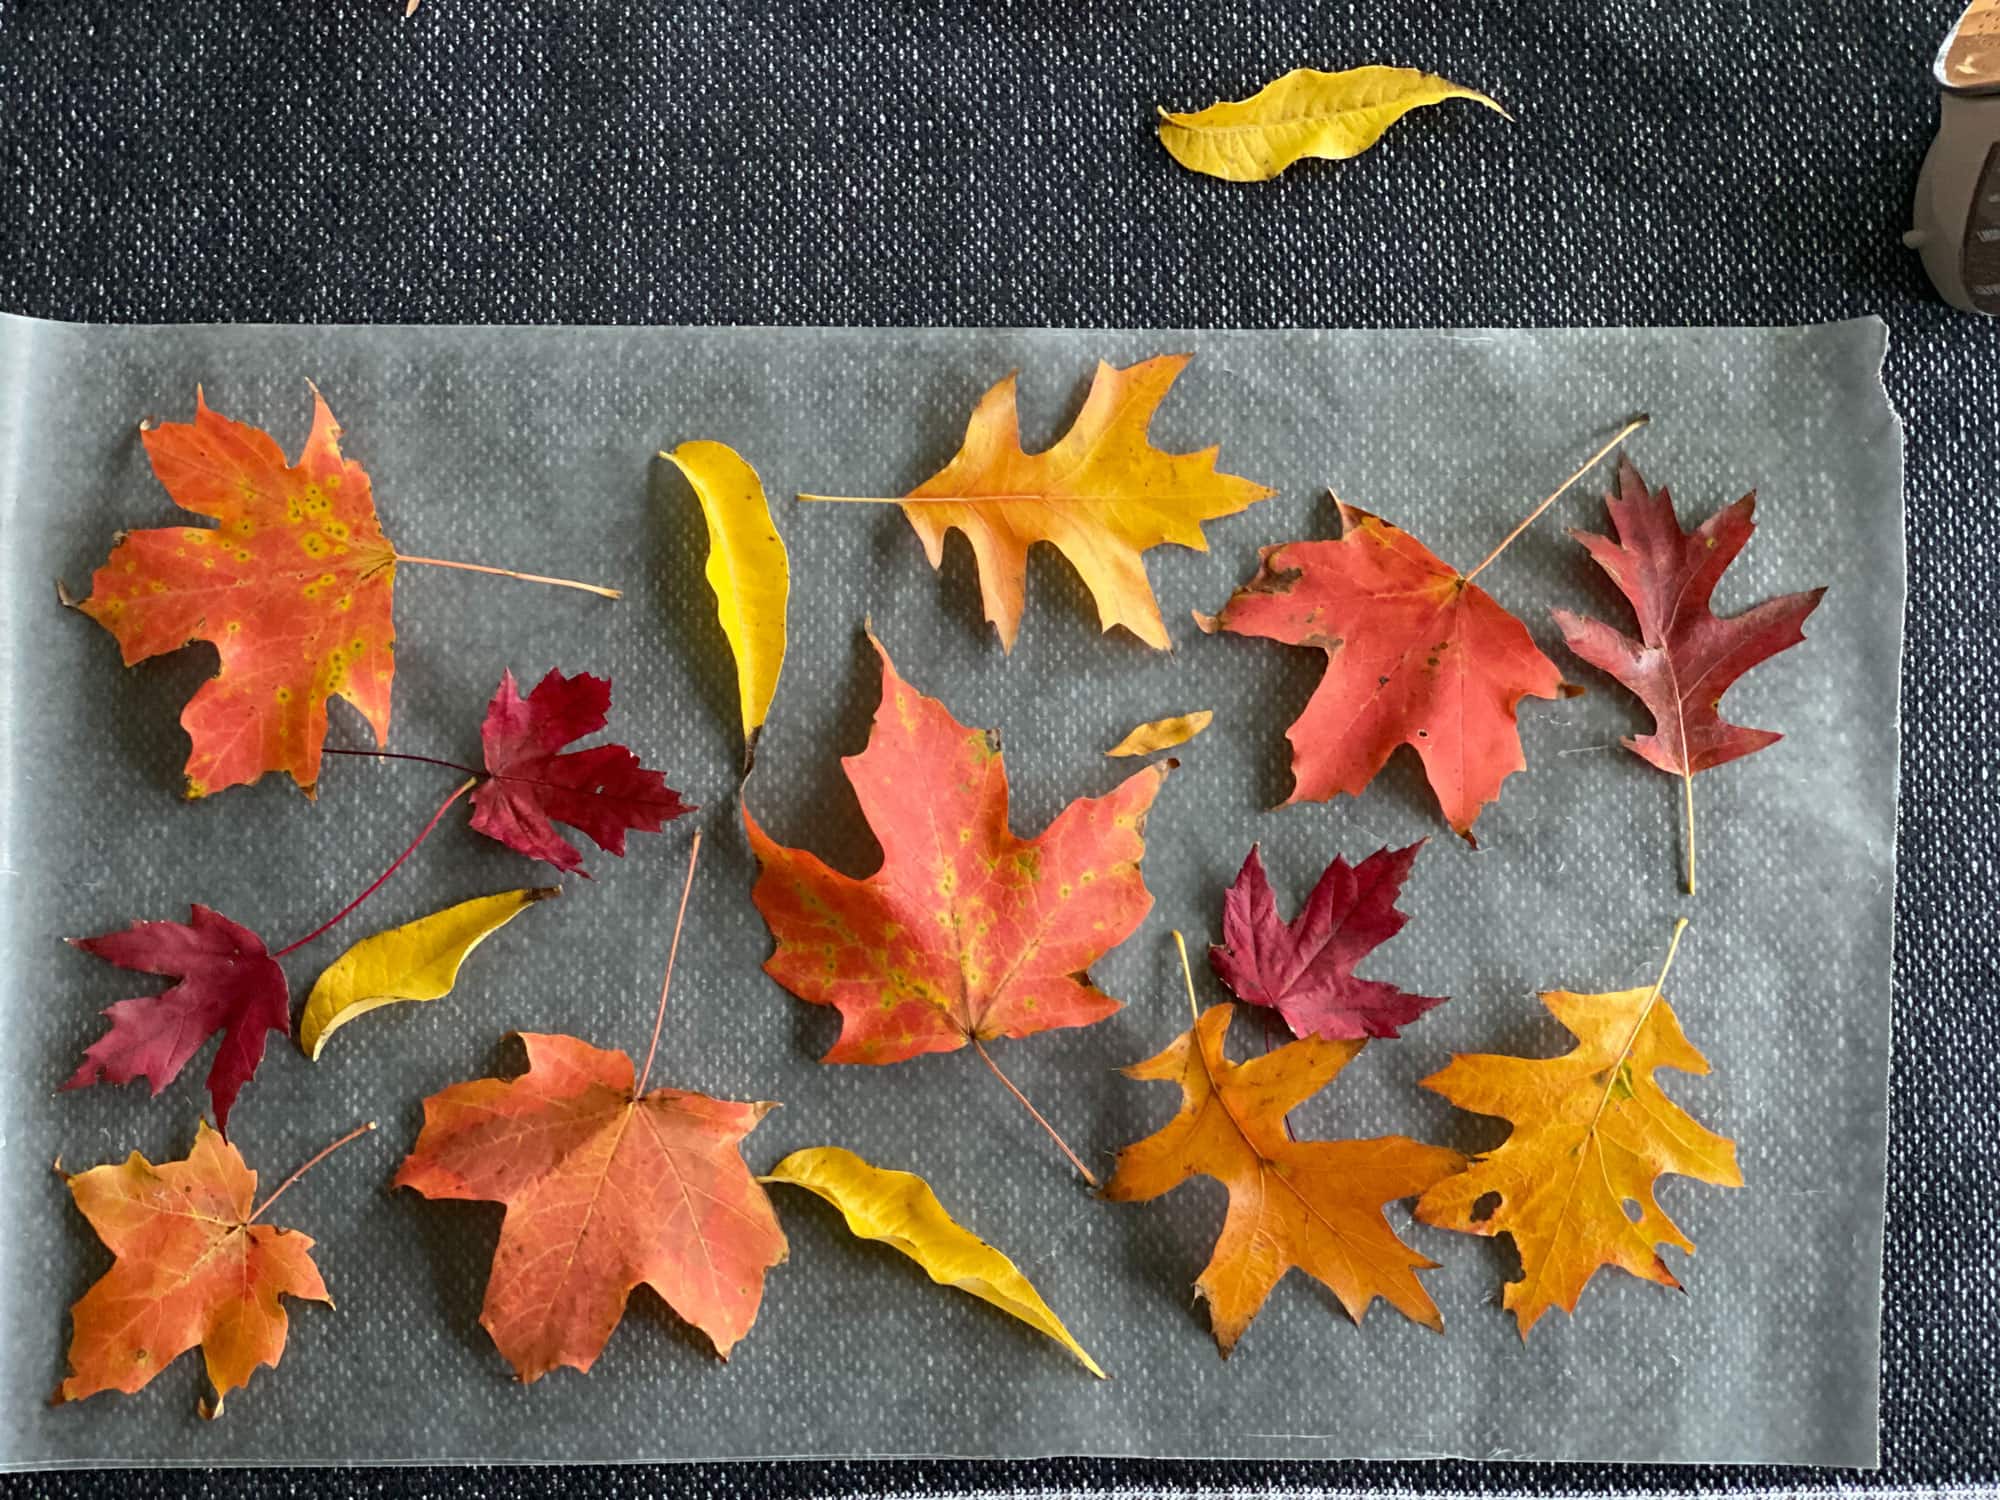 Leaves on wax paper